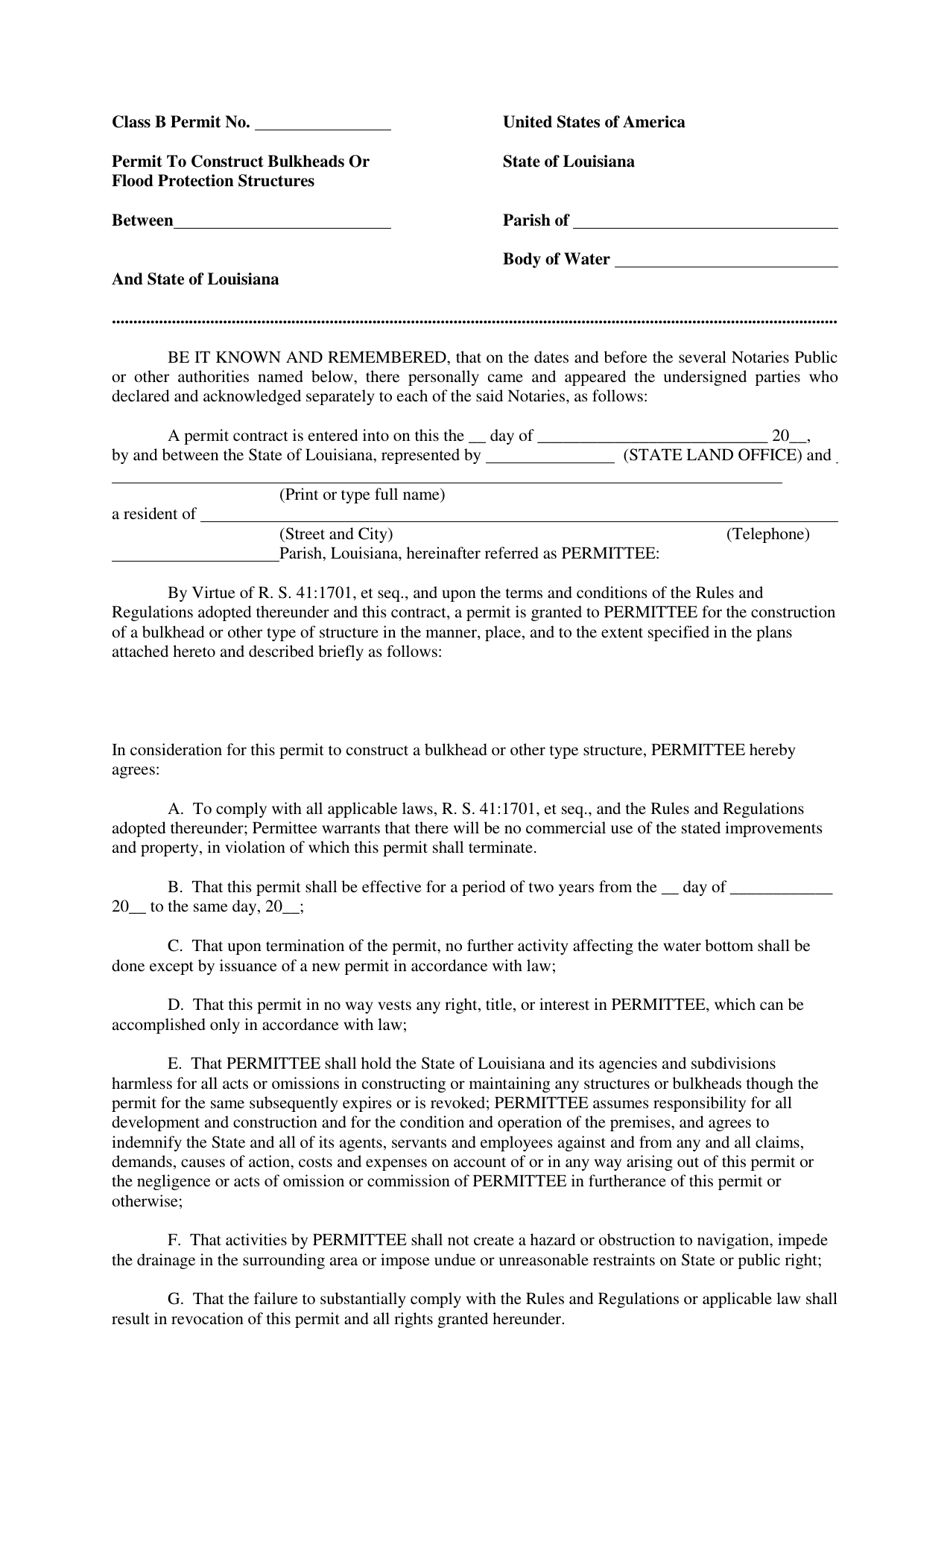 Class B Permit to Construct Bulkheads or Flood Protection Structures - Louisiana, Page 1